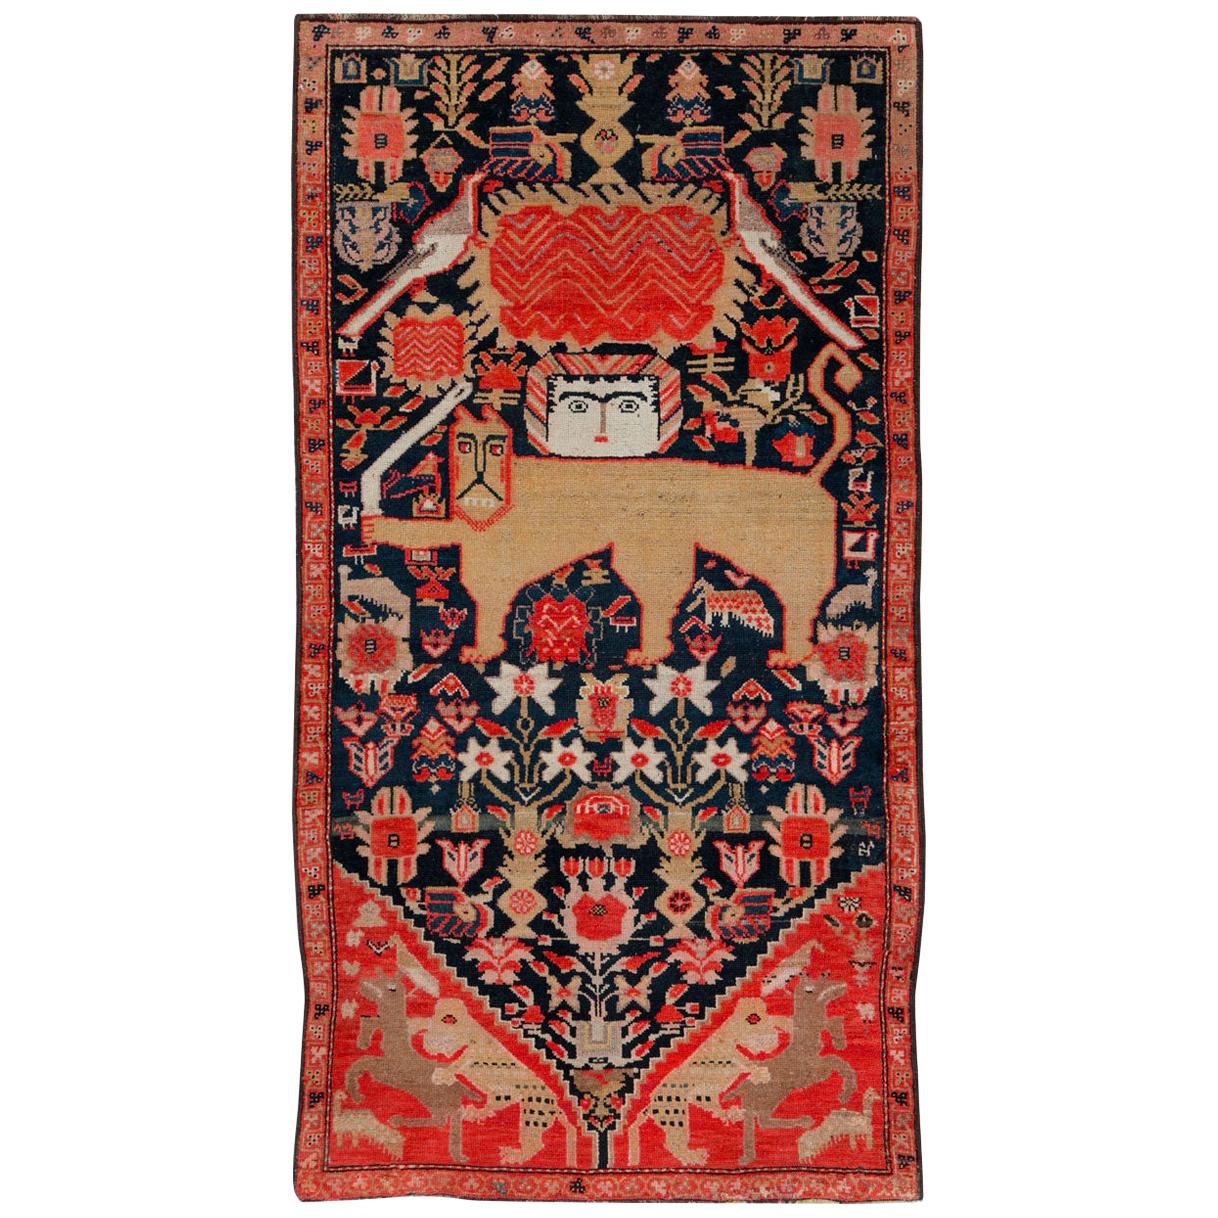 Early 20th Century Persian Lion with Sword and Sun Pictorial Malayer Throw Rug